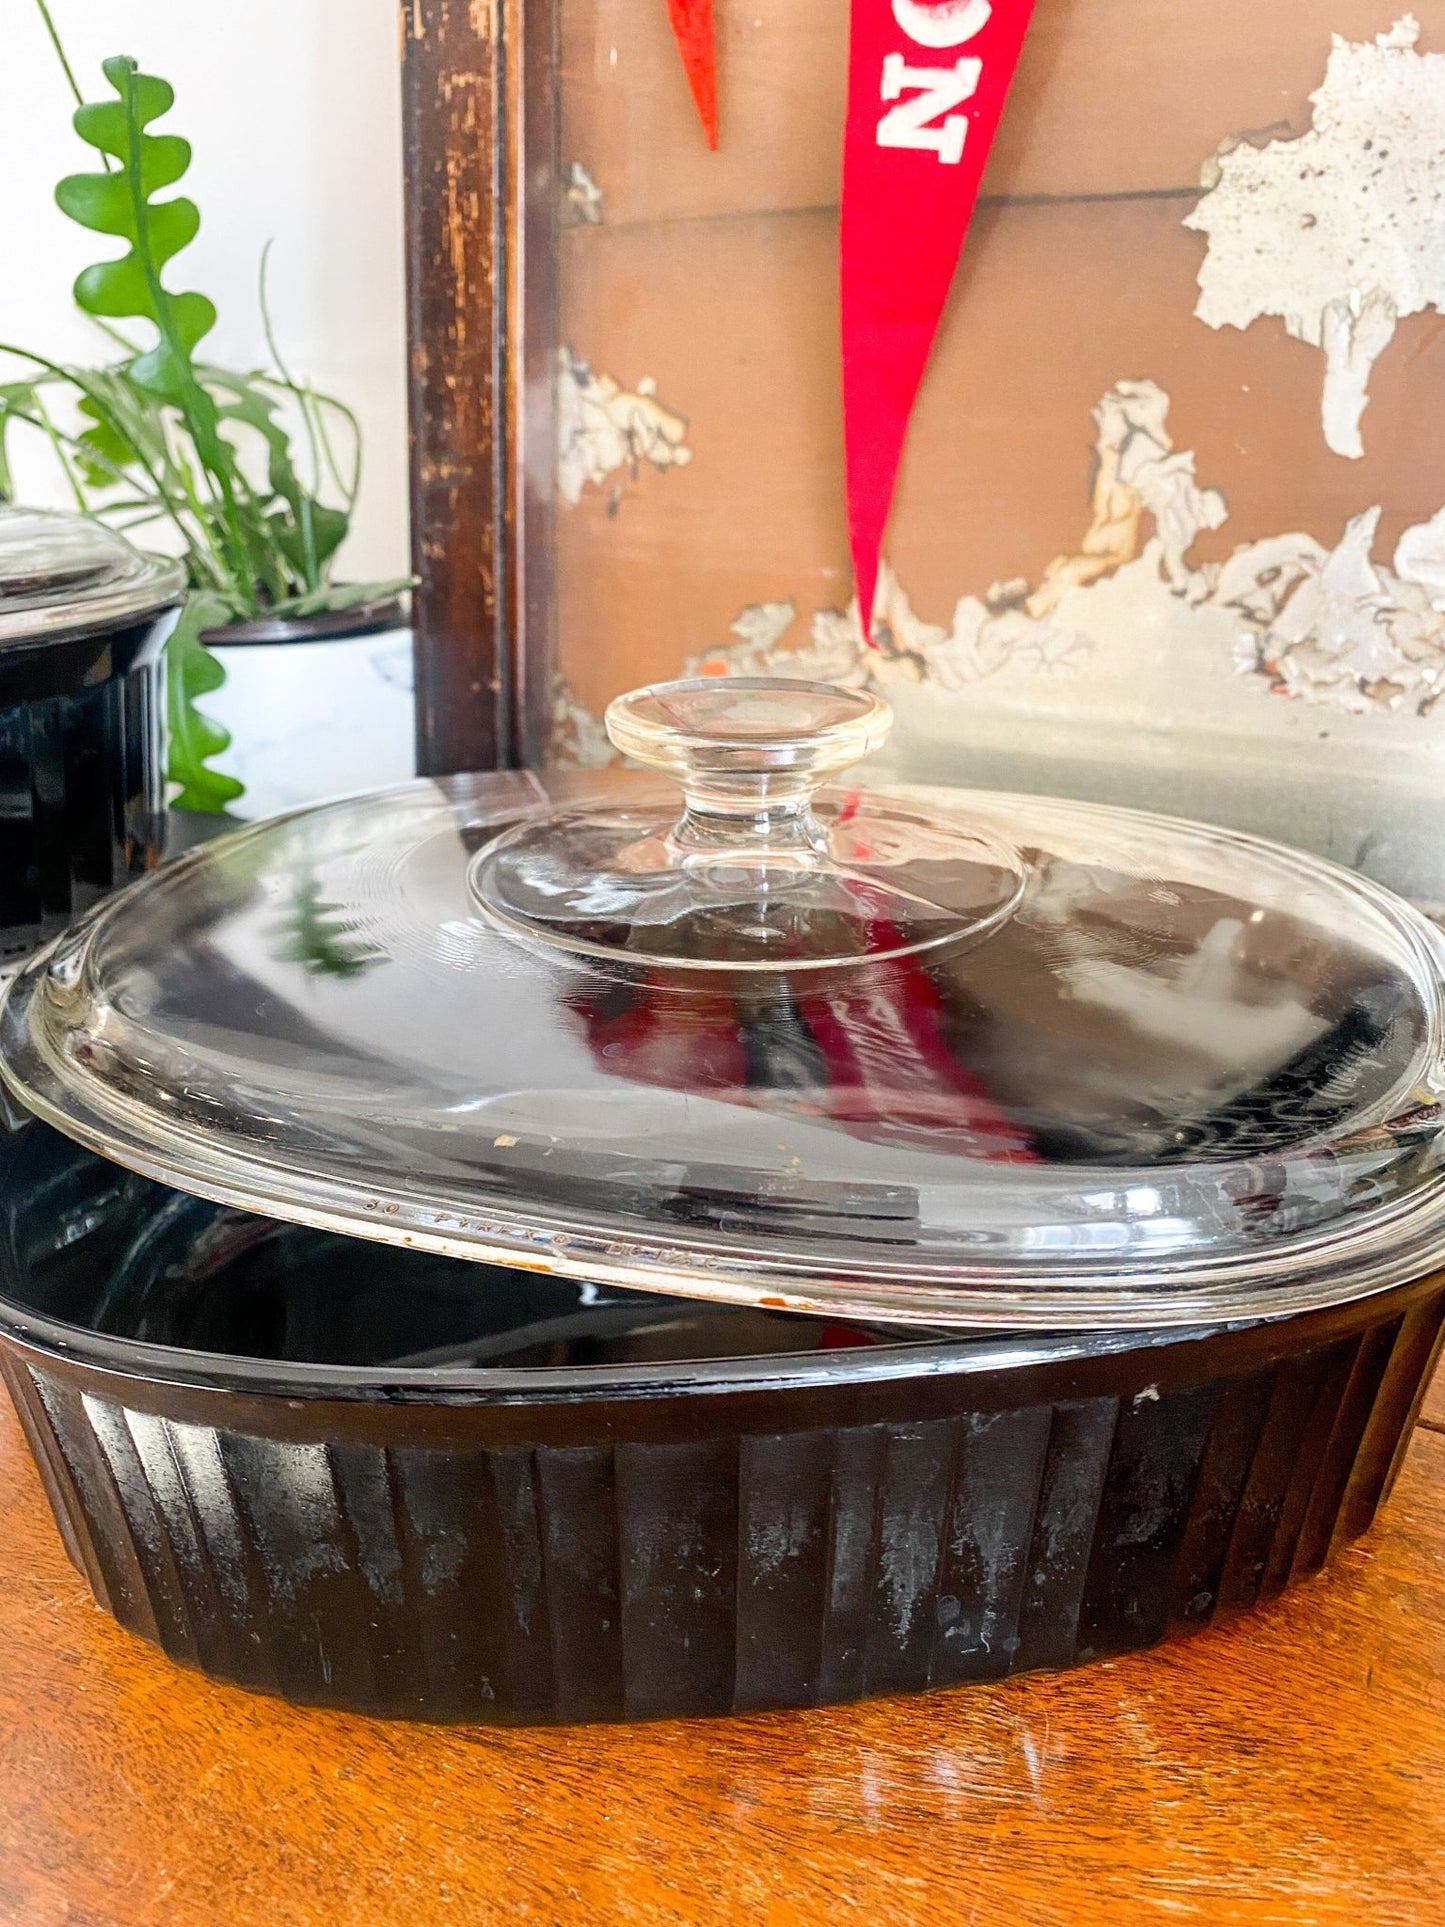 The black casserole dish is in full focus with the dish sitting on a wooden top. The clear, round lid is partially off to show the inside. The exterior black base is fluted to the top where it meets the lid.  